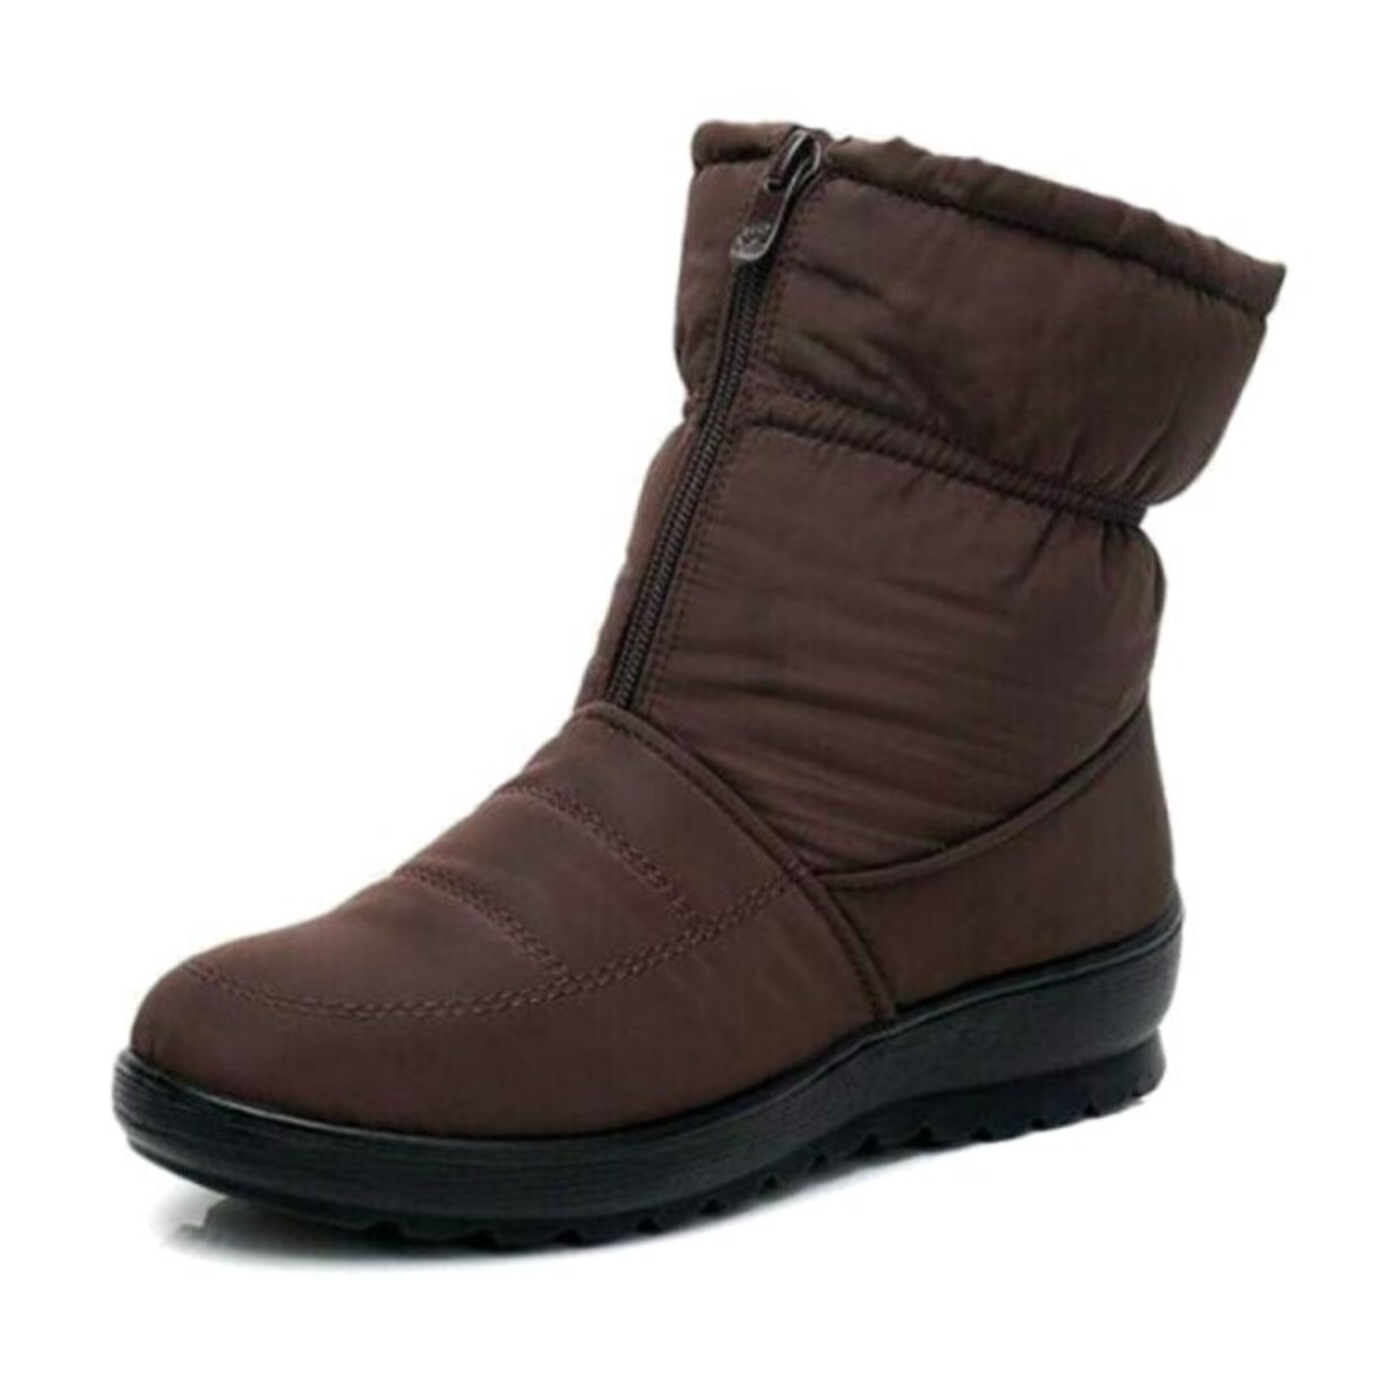 Women's Snow Ankle Boots - Winter Warm